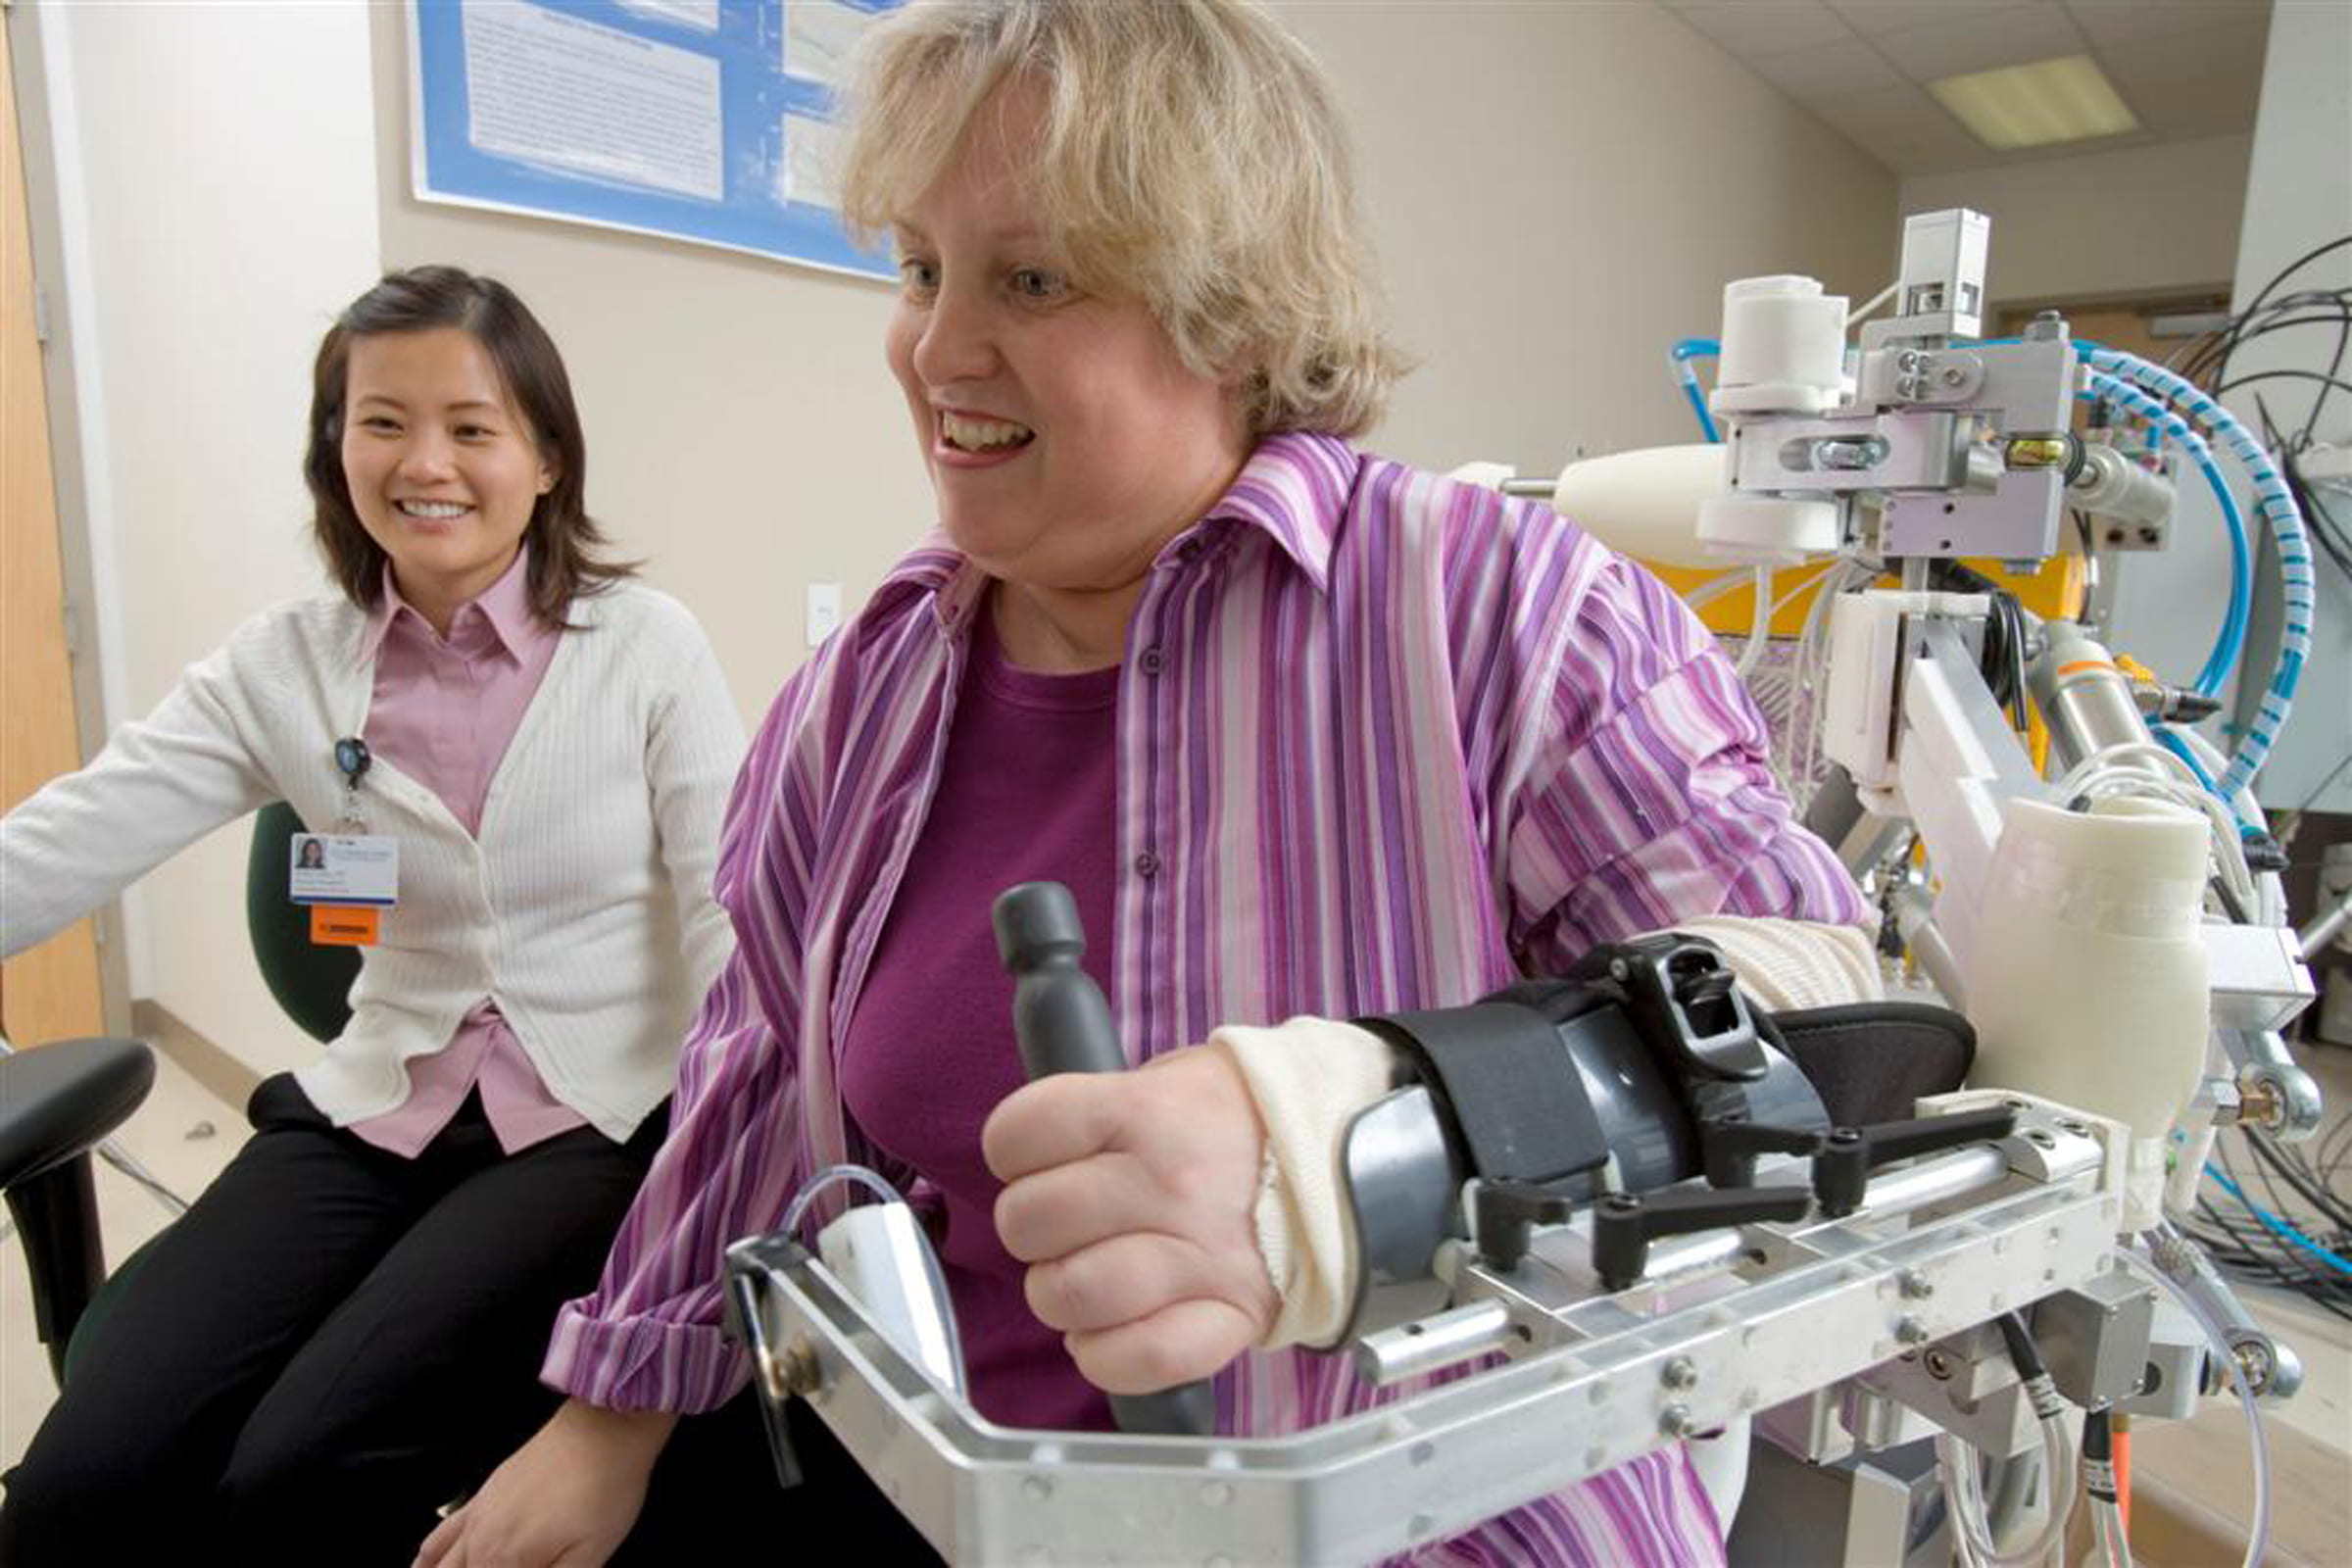 Patient using the robotic arm for rehab